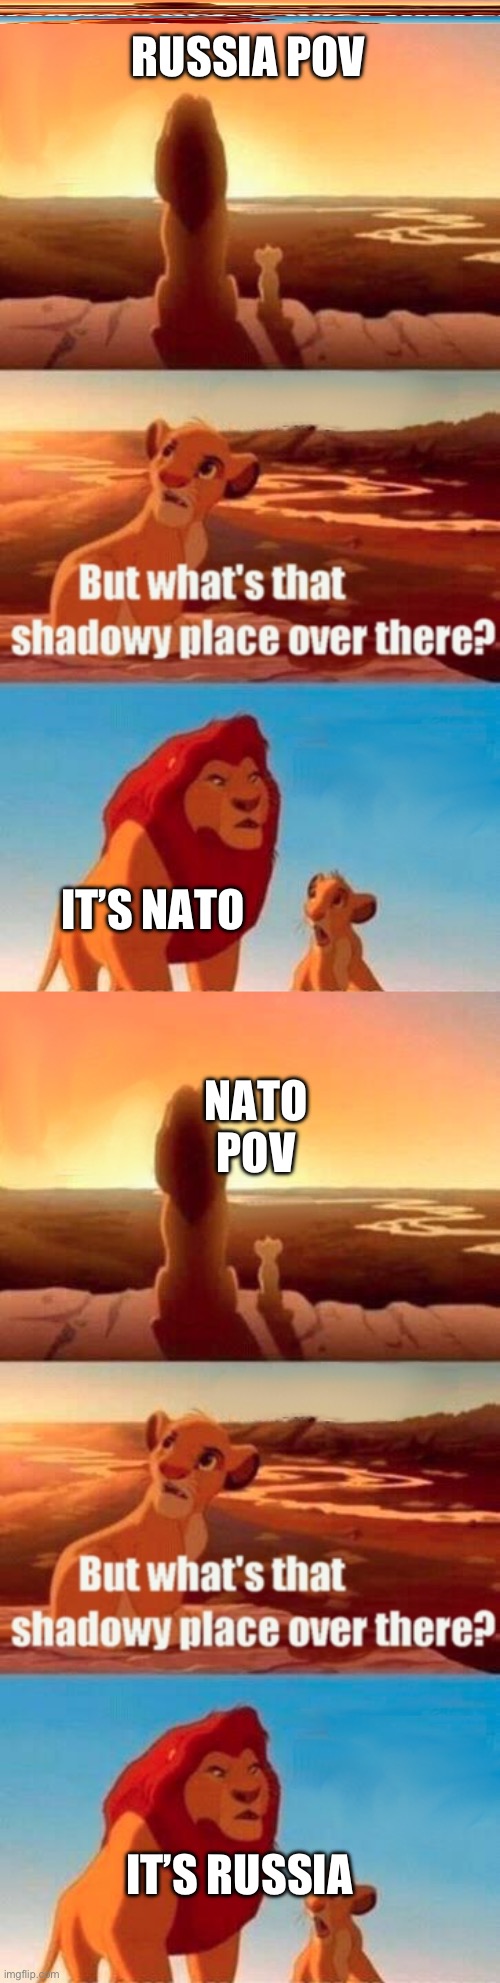 RUSSIA POV; IT’S NATO; NATO POV; IT’S RUSSIA | image tagged in memes,simba shadowy place | made w/ Imgflip meme maker